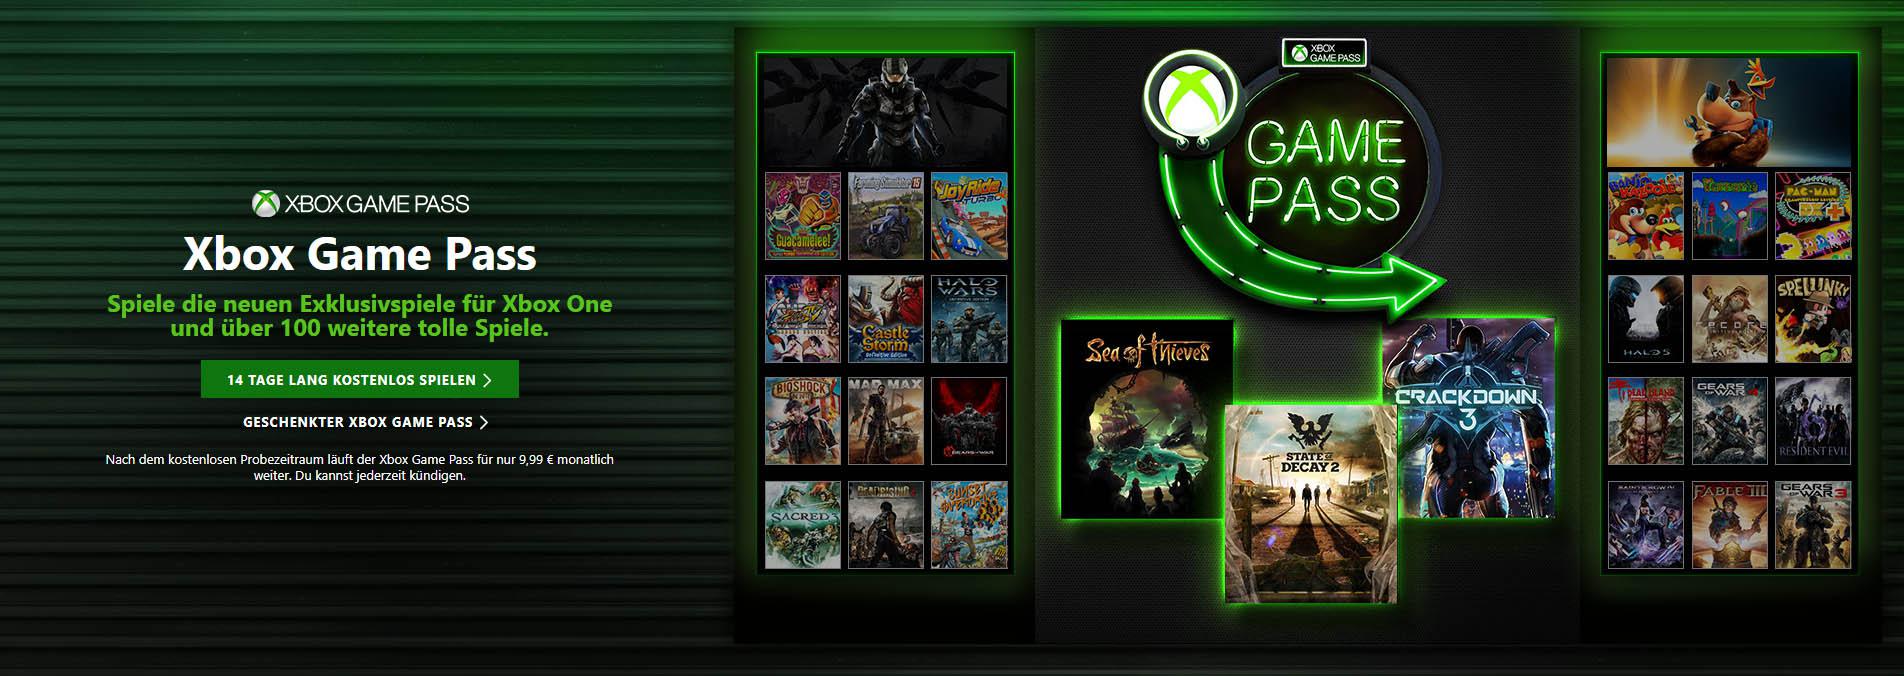 xbox game pass and xbox live